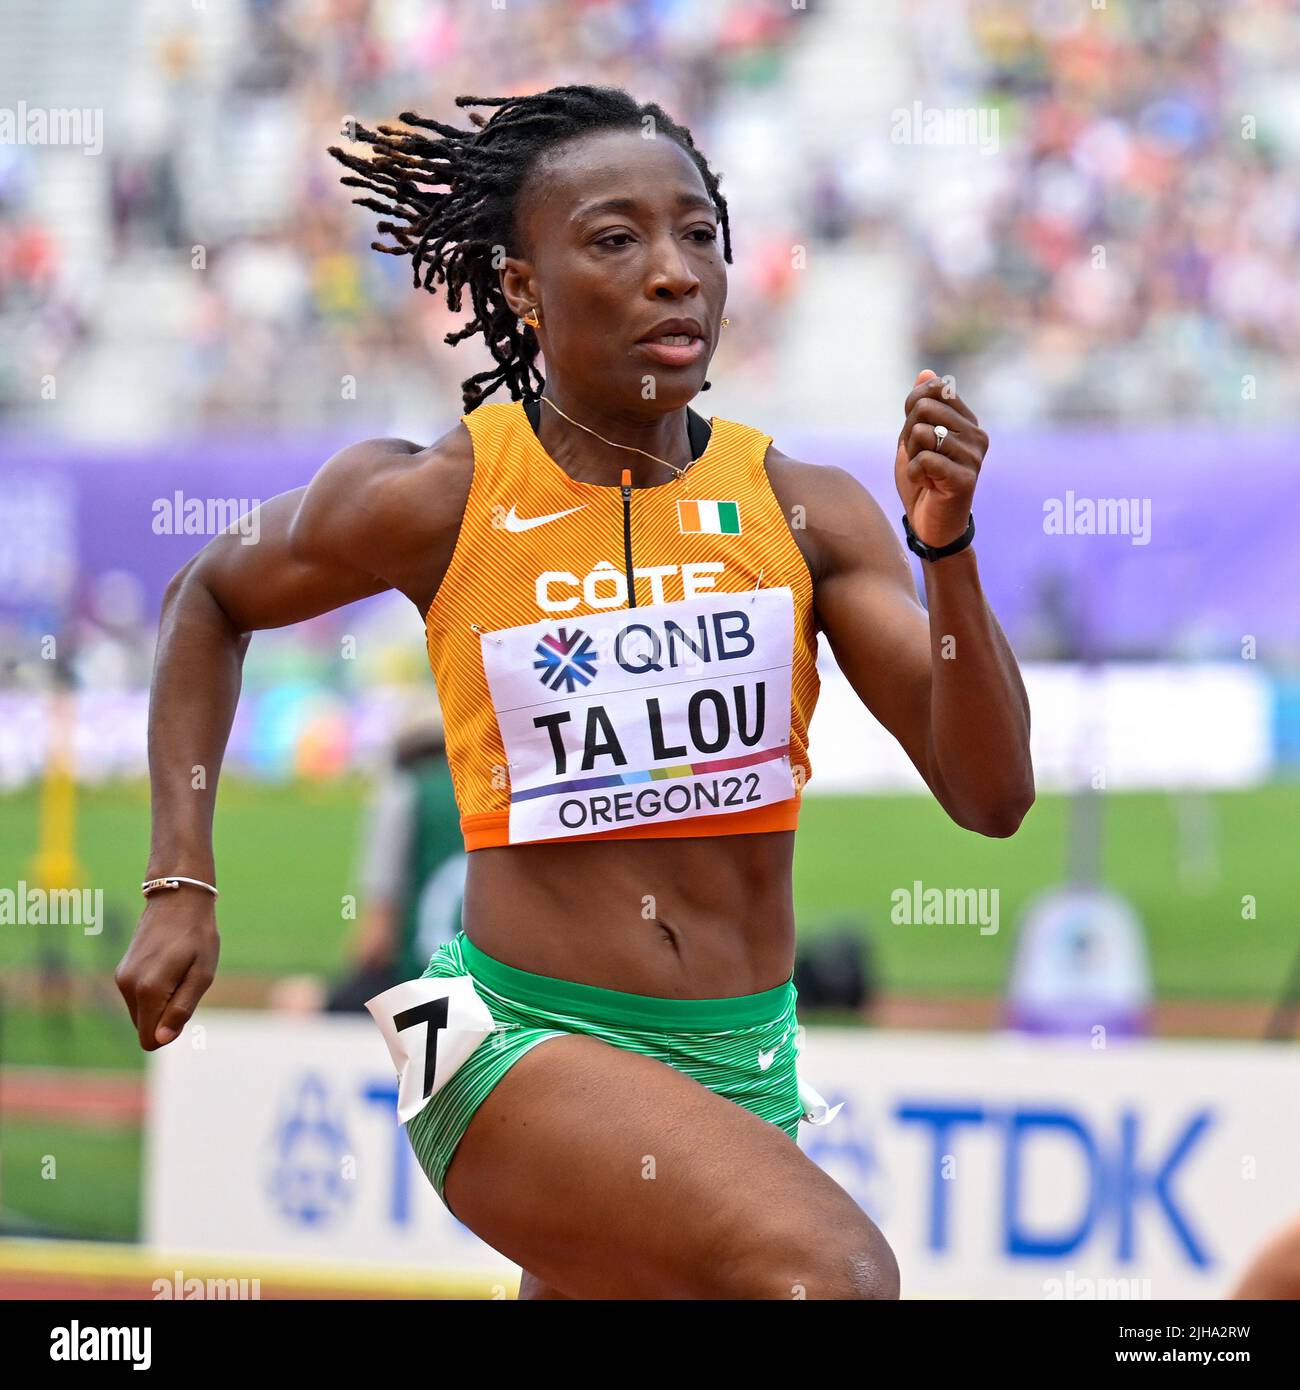 EUGENE, UNITED STATES - JULY 16: Marie-Josee Ta Lou of Cote d’Ivoire competing on Women's 100 metres during the World Athletics Championships on July 16, 2022 in Eugene, United States (Photo by Andy Astfalck/BSR Agency) Atletiekunie Stock Photo